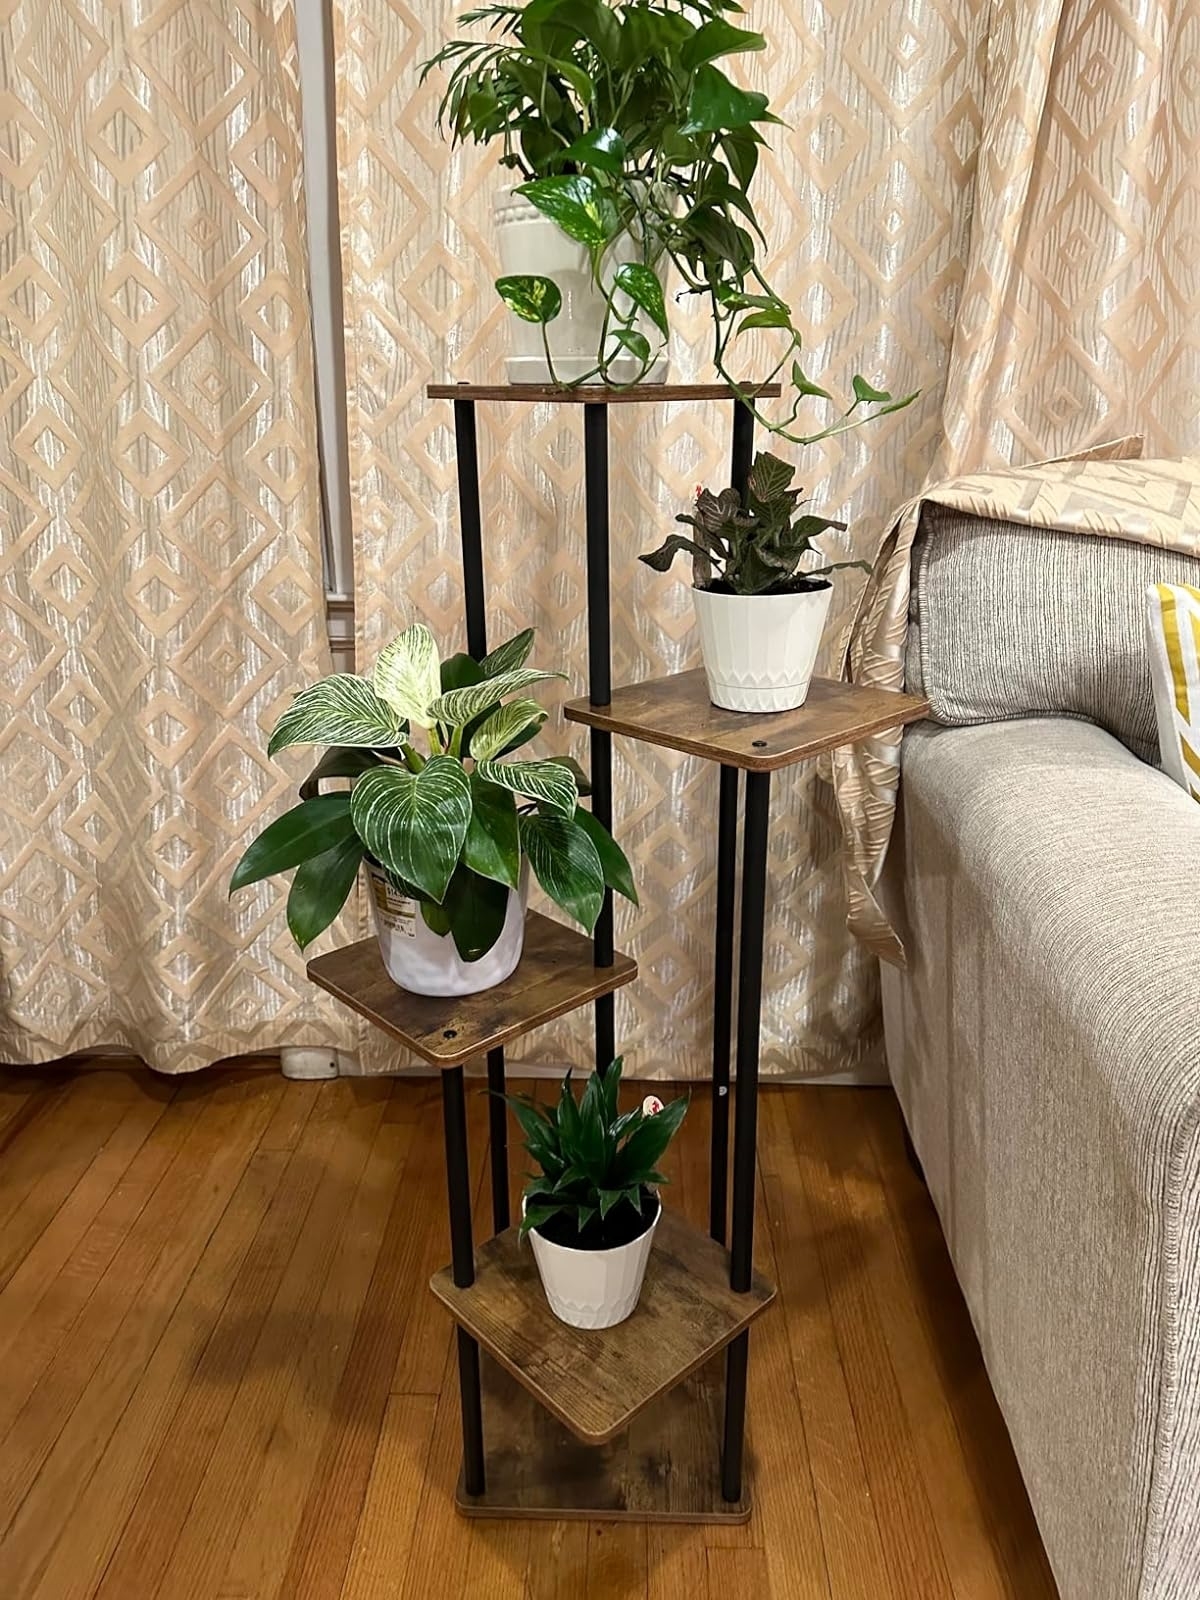 Three-tiered wooden and metal stand with various houseplants beside a sofa